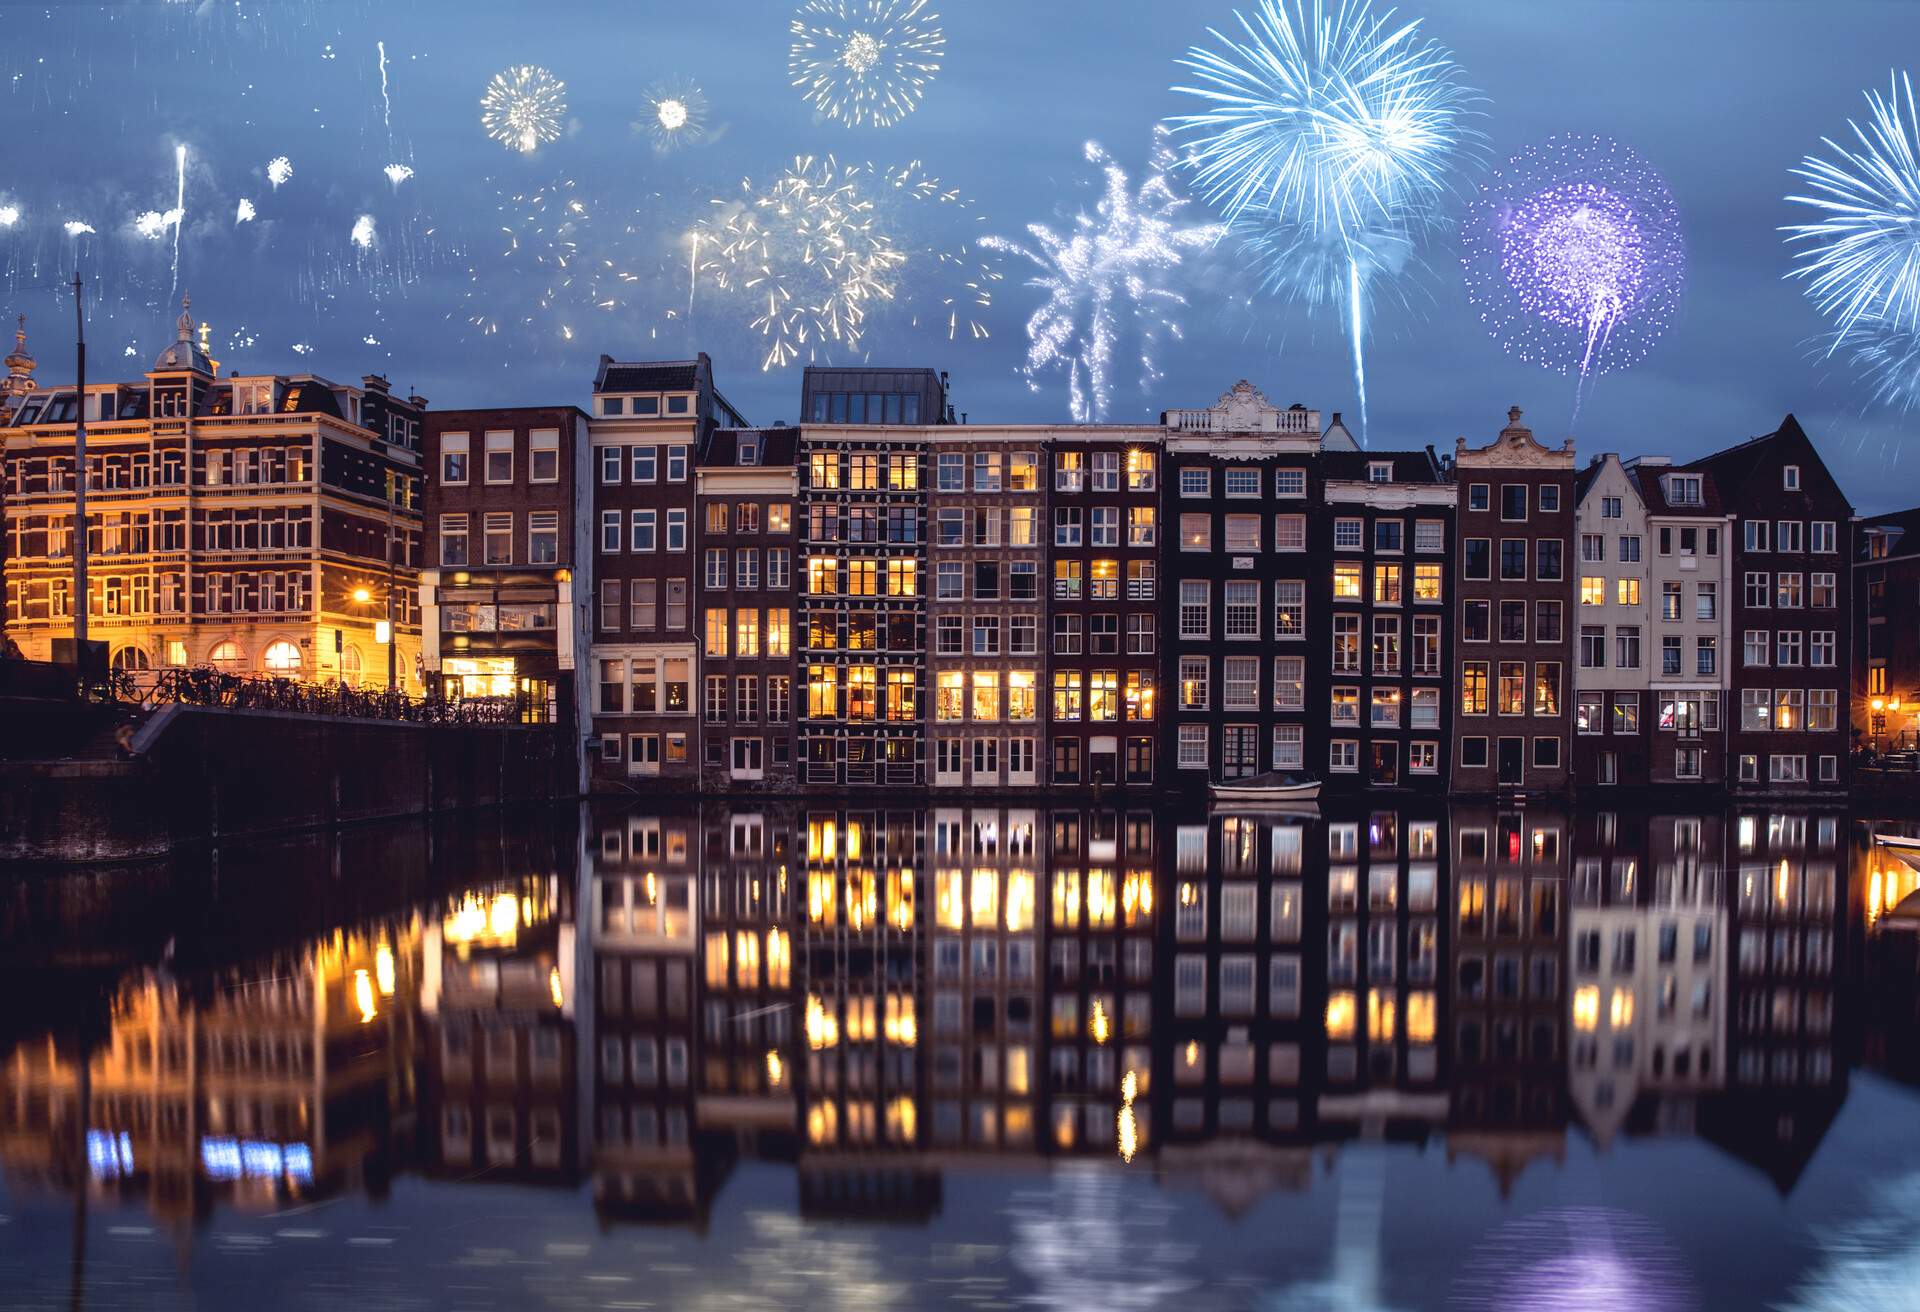 fireworks above the traditional narrow houses by the canals in Amsterdam